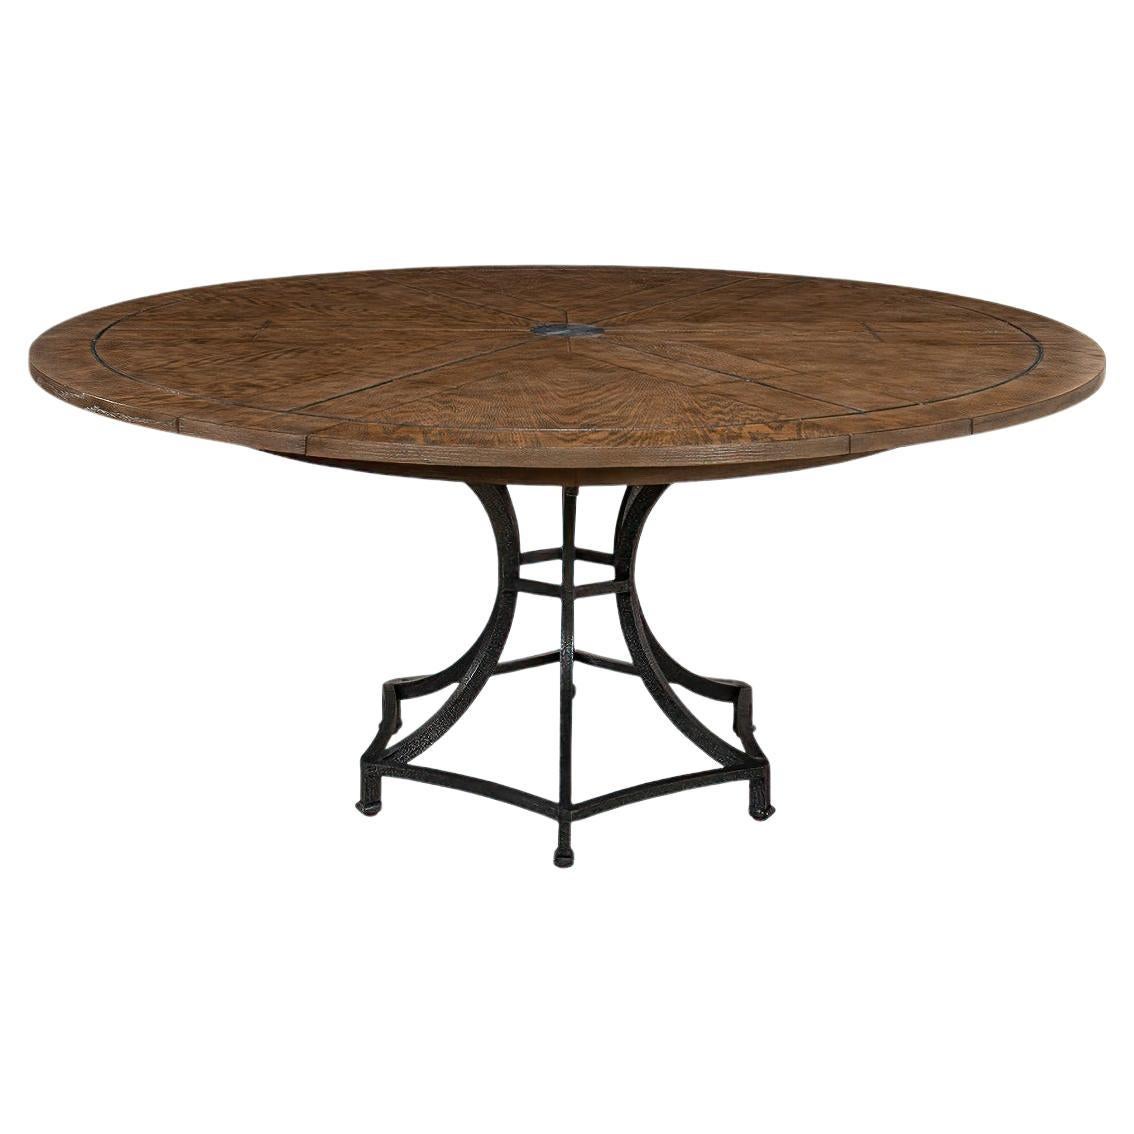 Modern Industrial Round Dining Table - Oak